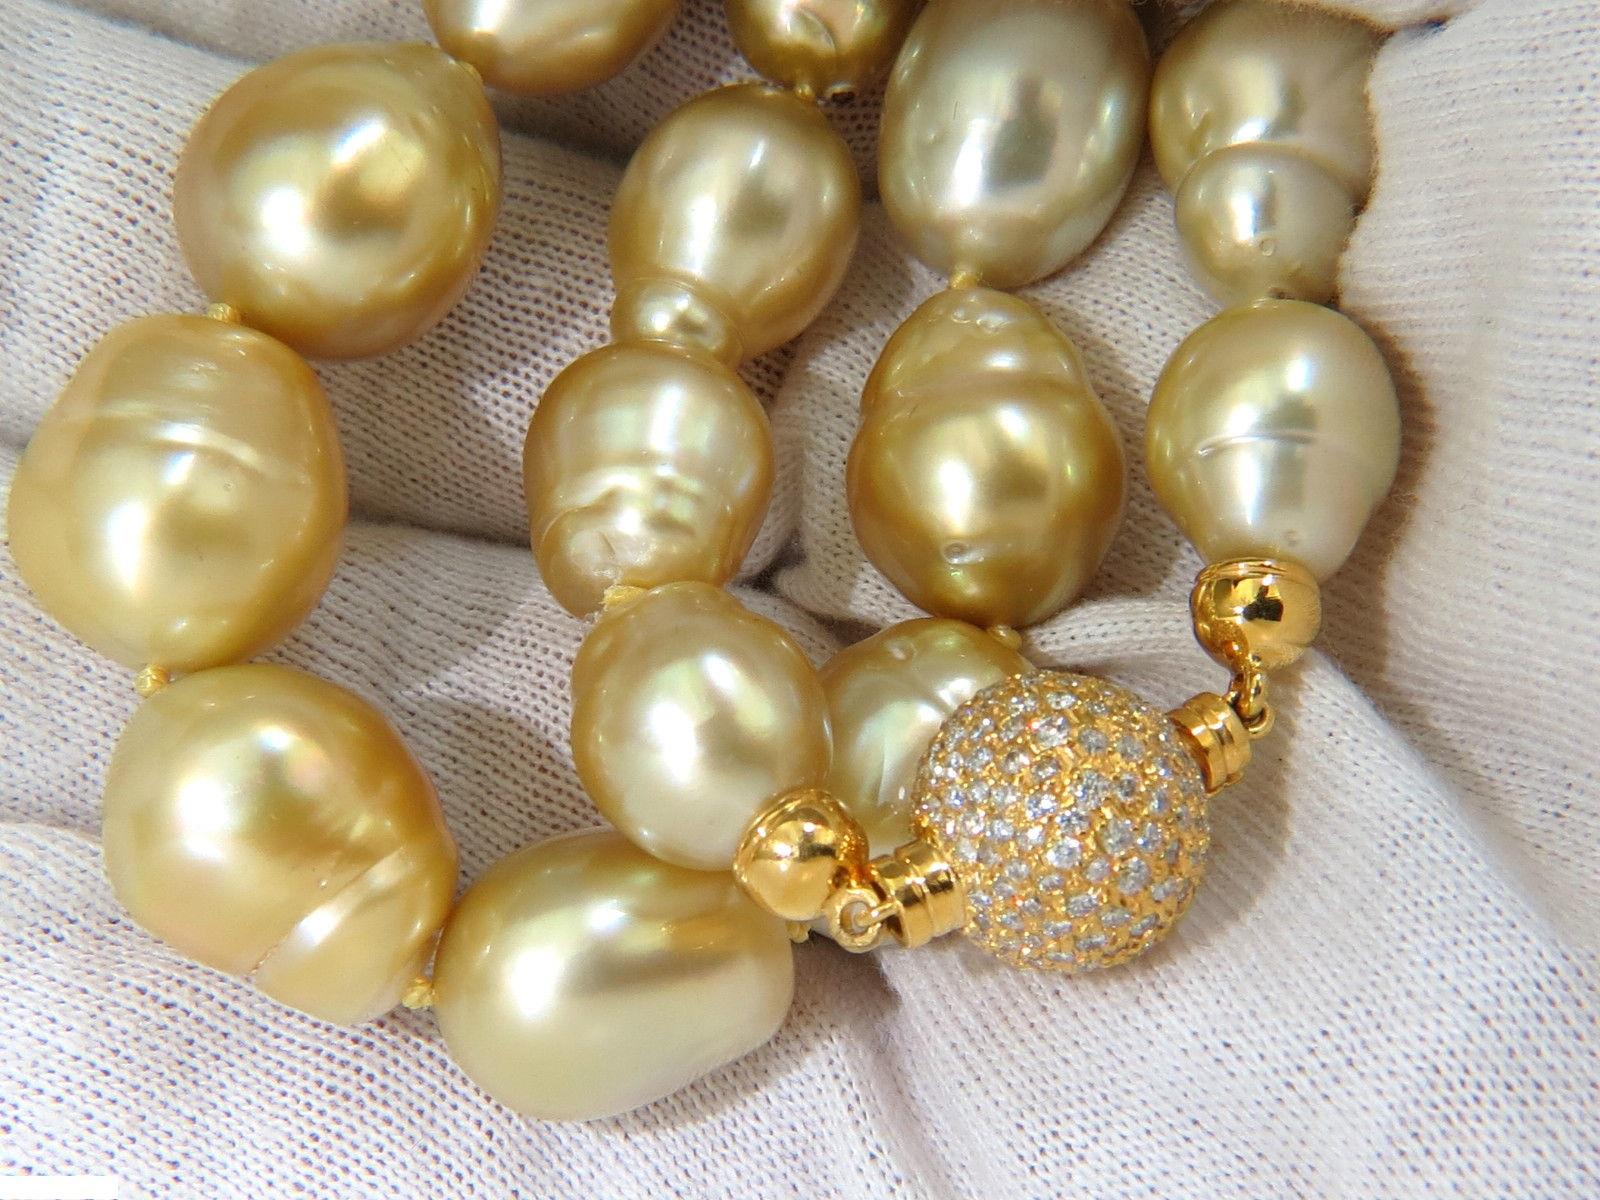 14.6- 12.1mm Natural South Sea yellow pearls necklace.

Amazing vivid sheen and color saturation

No significant dents, pits, nicks or scratches.

18kt. yellow gold 2.00ct. diamond ball bead set clasp

14mm in diameter

G-color, Vs-2 clarity

Total: